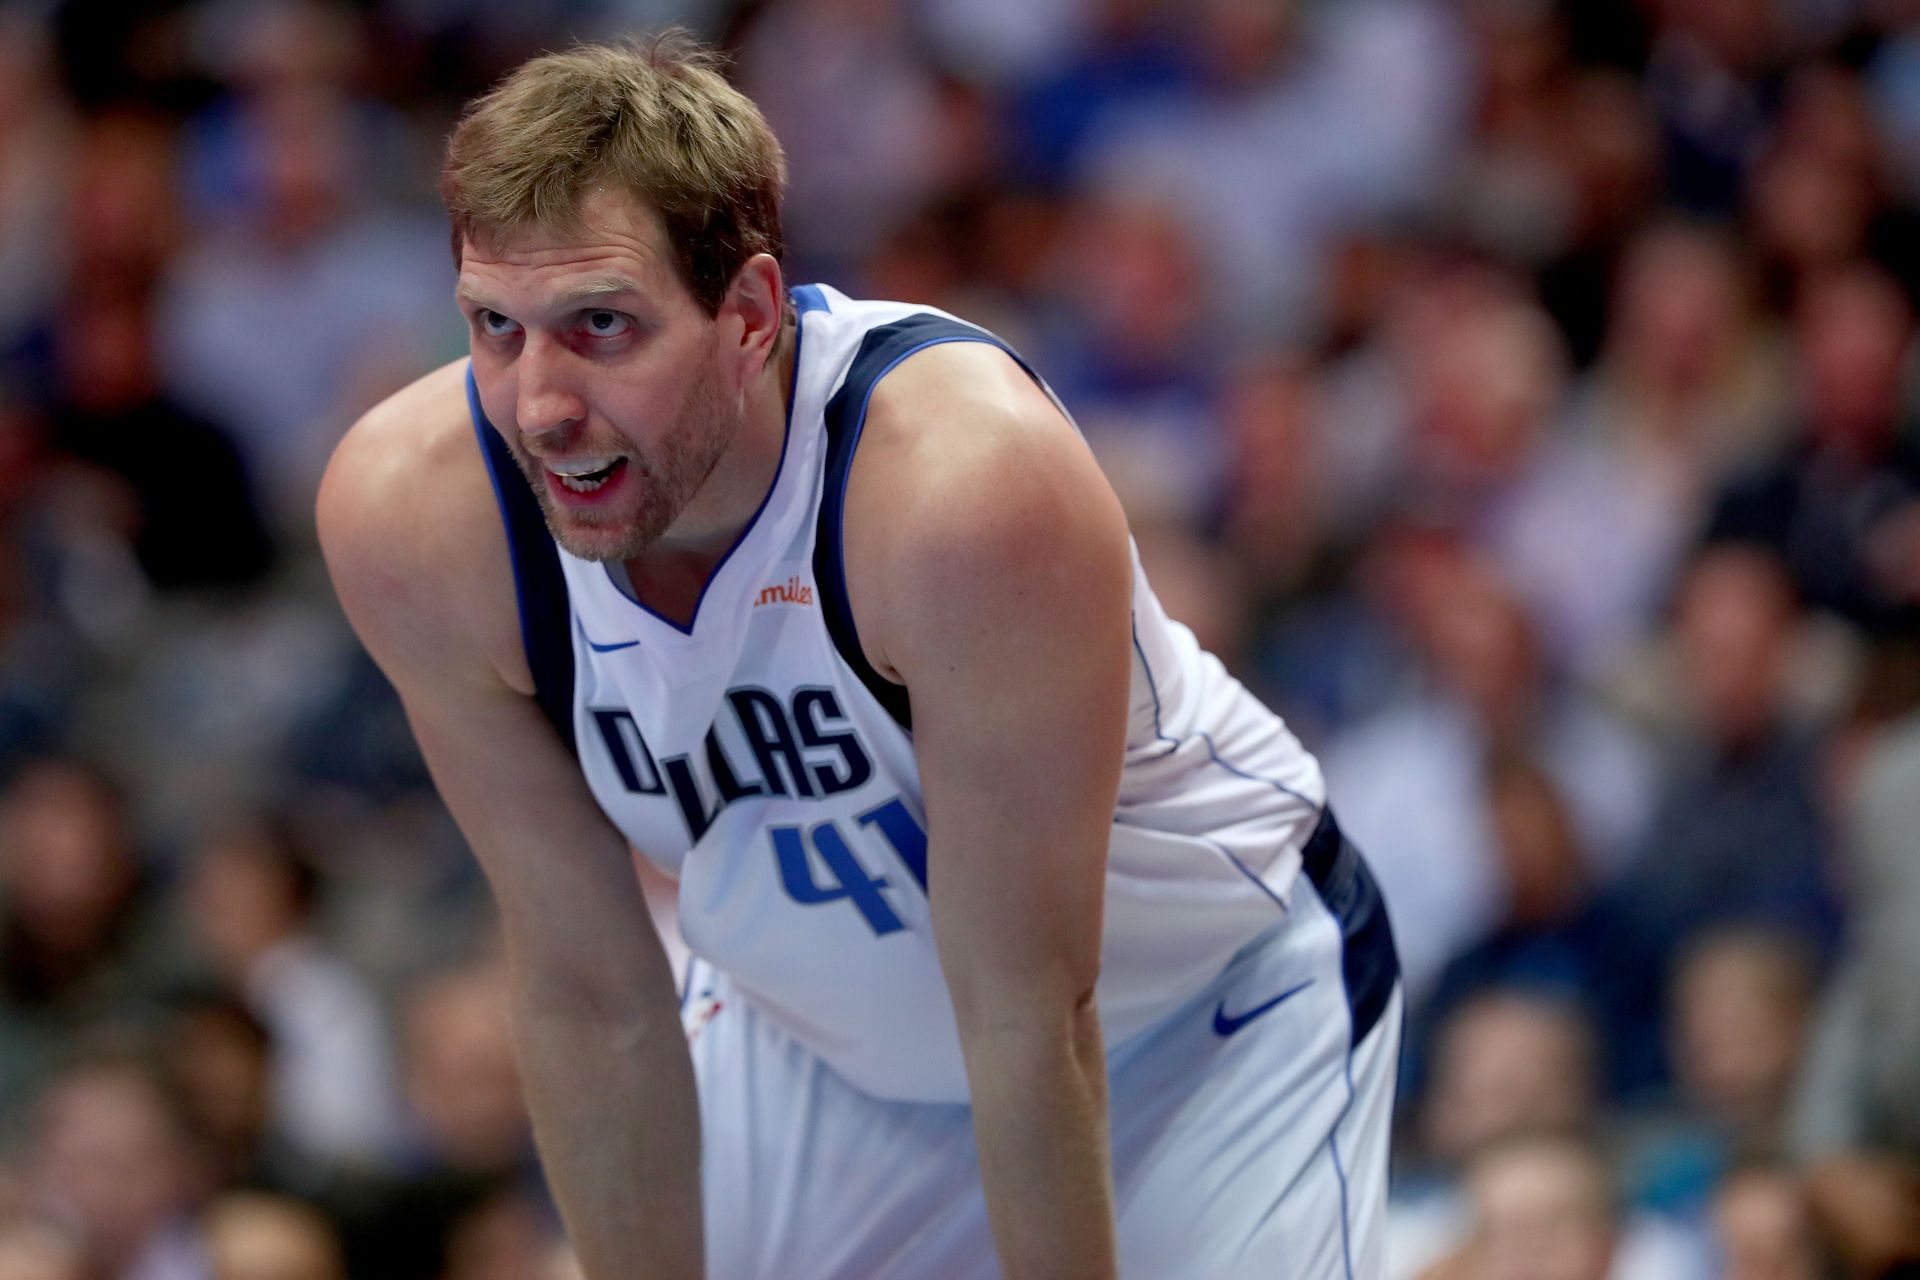 Dirk Nowitzki in action during a game